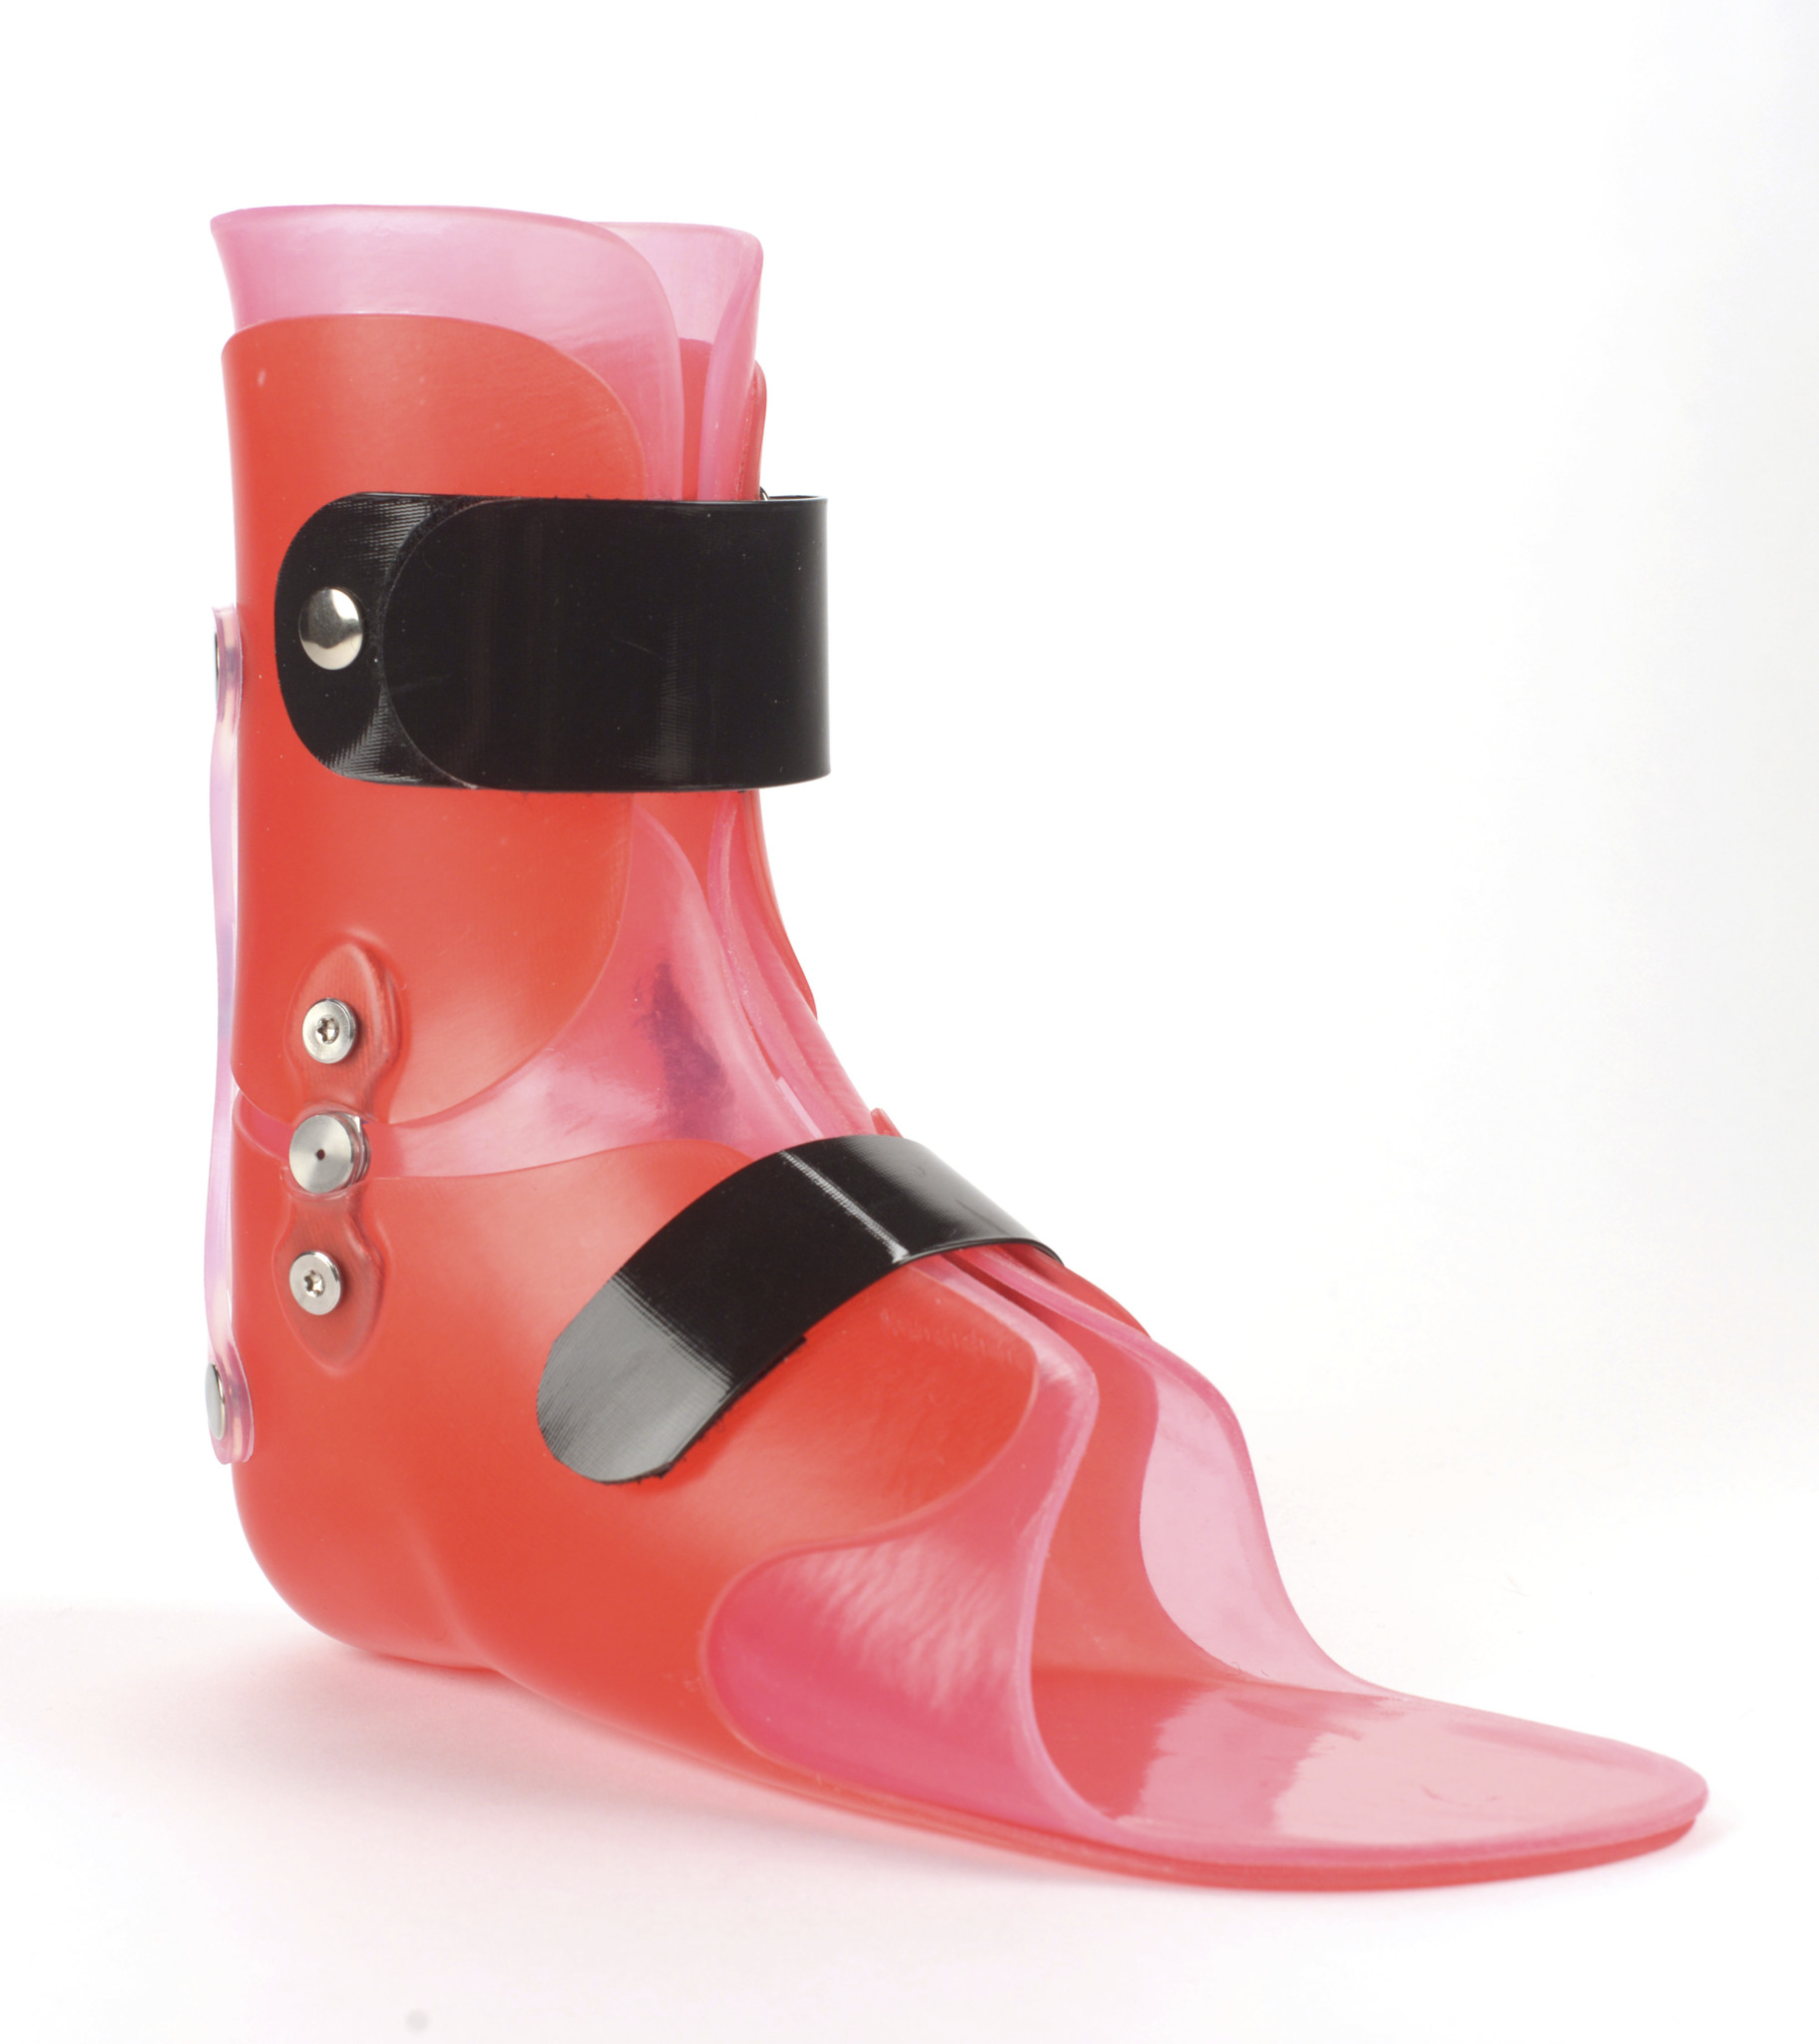 Pivot Installed on an Orthosis